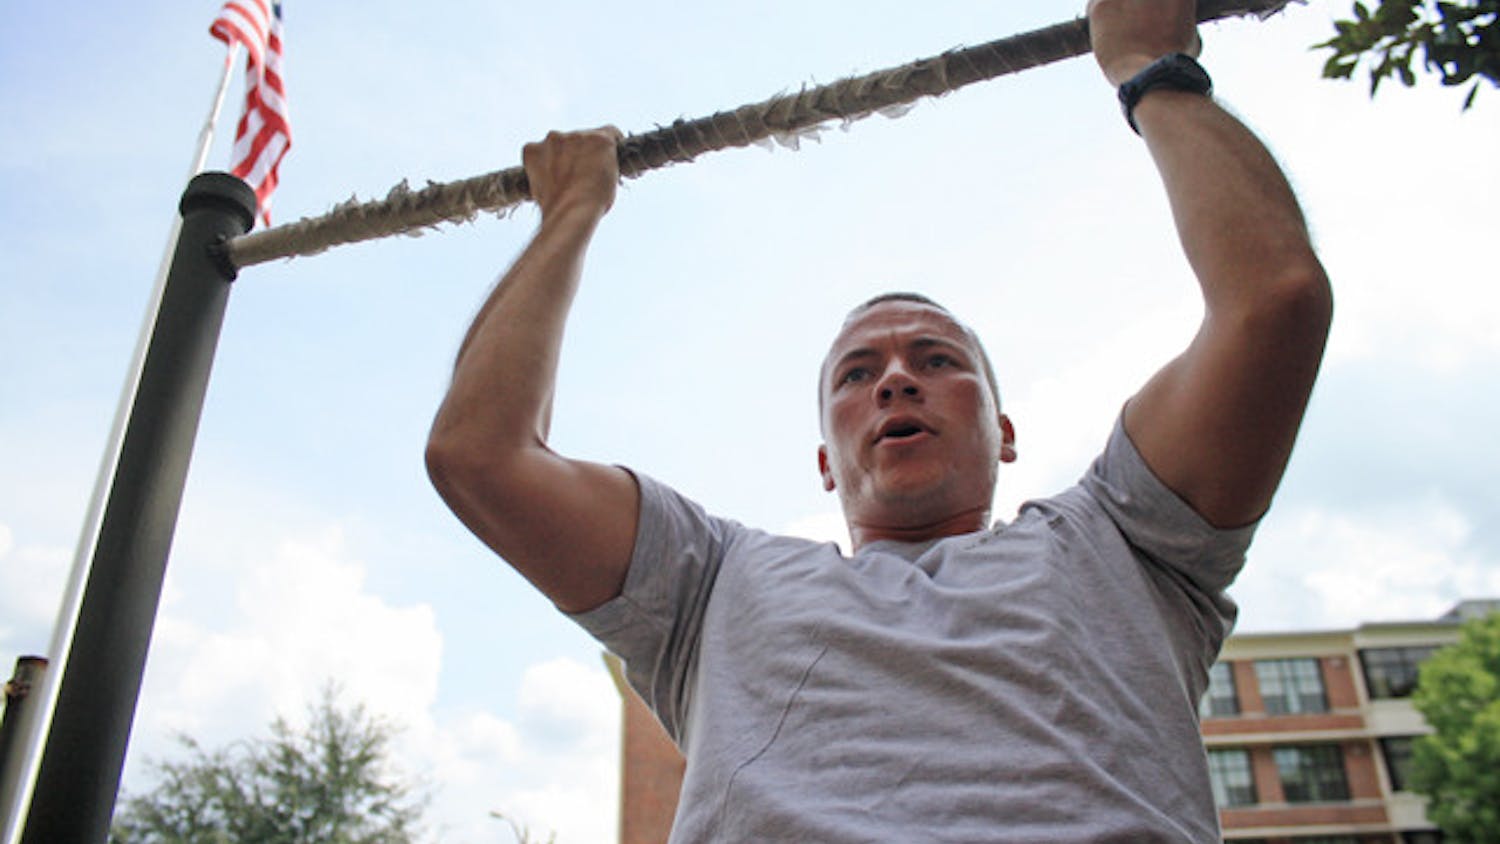 Air Force ROTC member Brandon Feldman does pull-ups before Physical Training. He is a member of the Air Force ROTC Detachment 150.